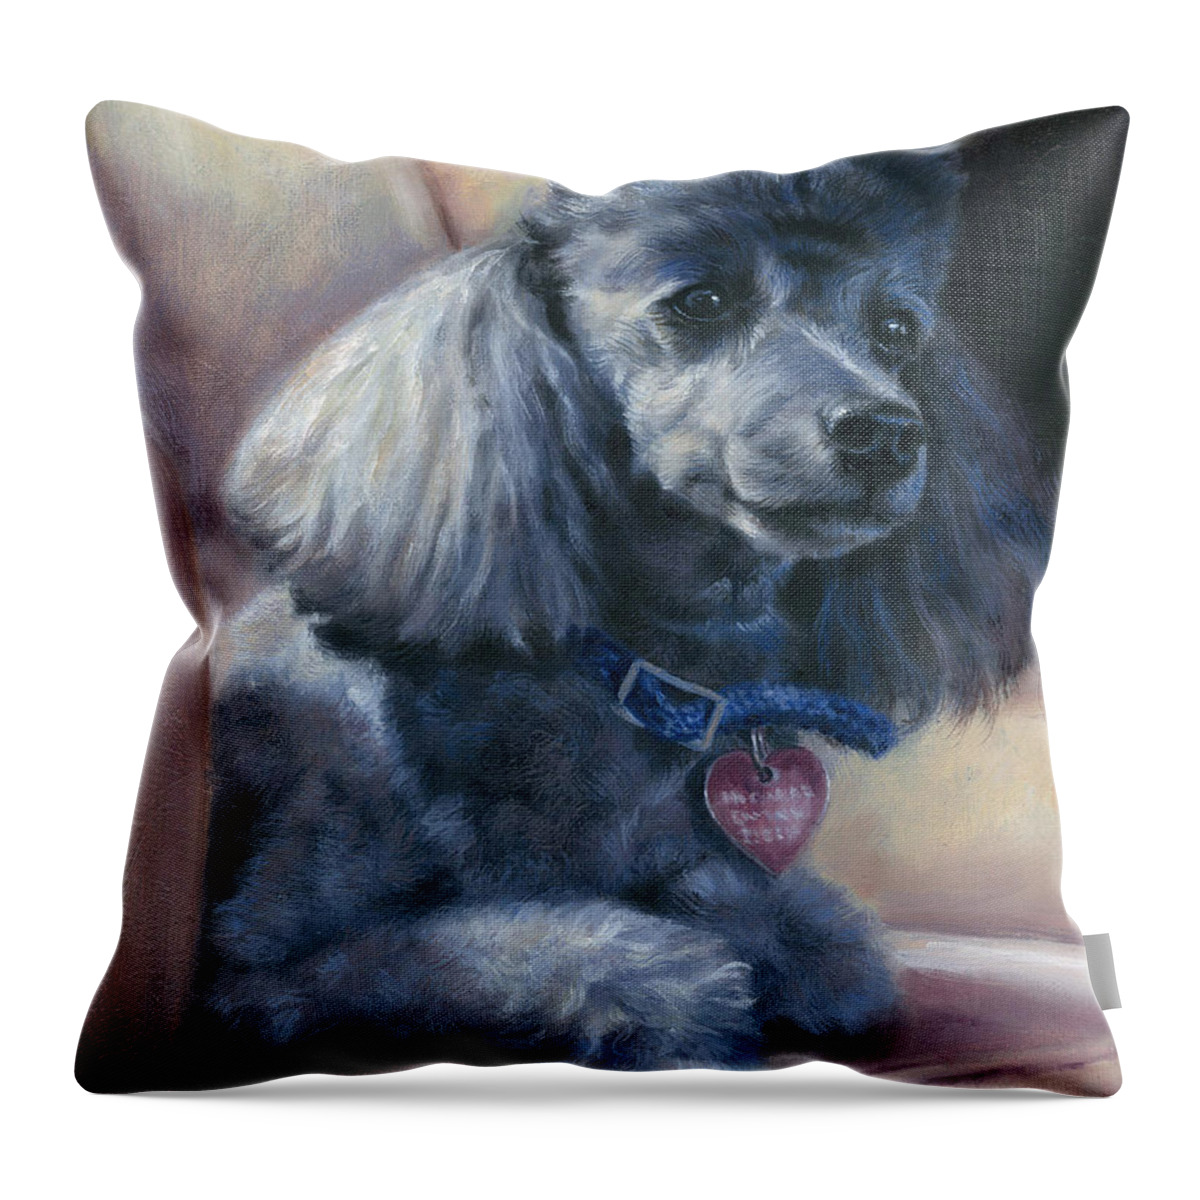 Poodle Throw Pillow featuring the painting Poodle by Nicole Troup